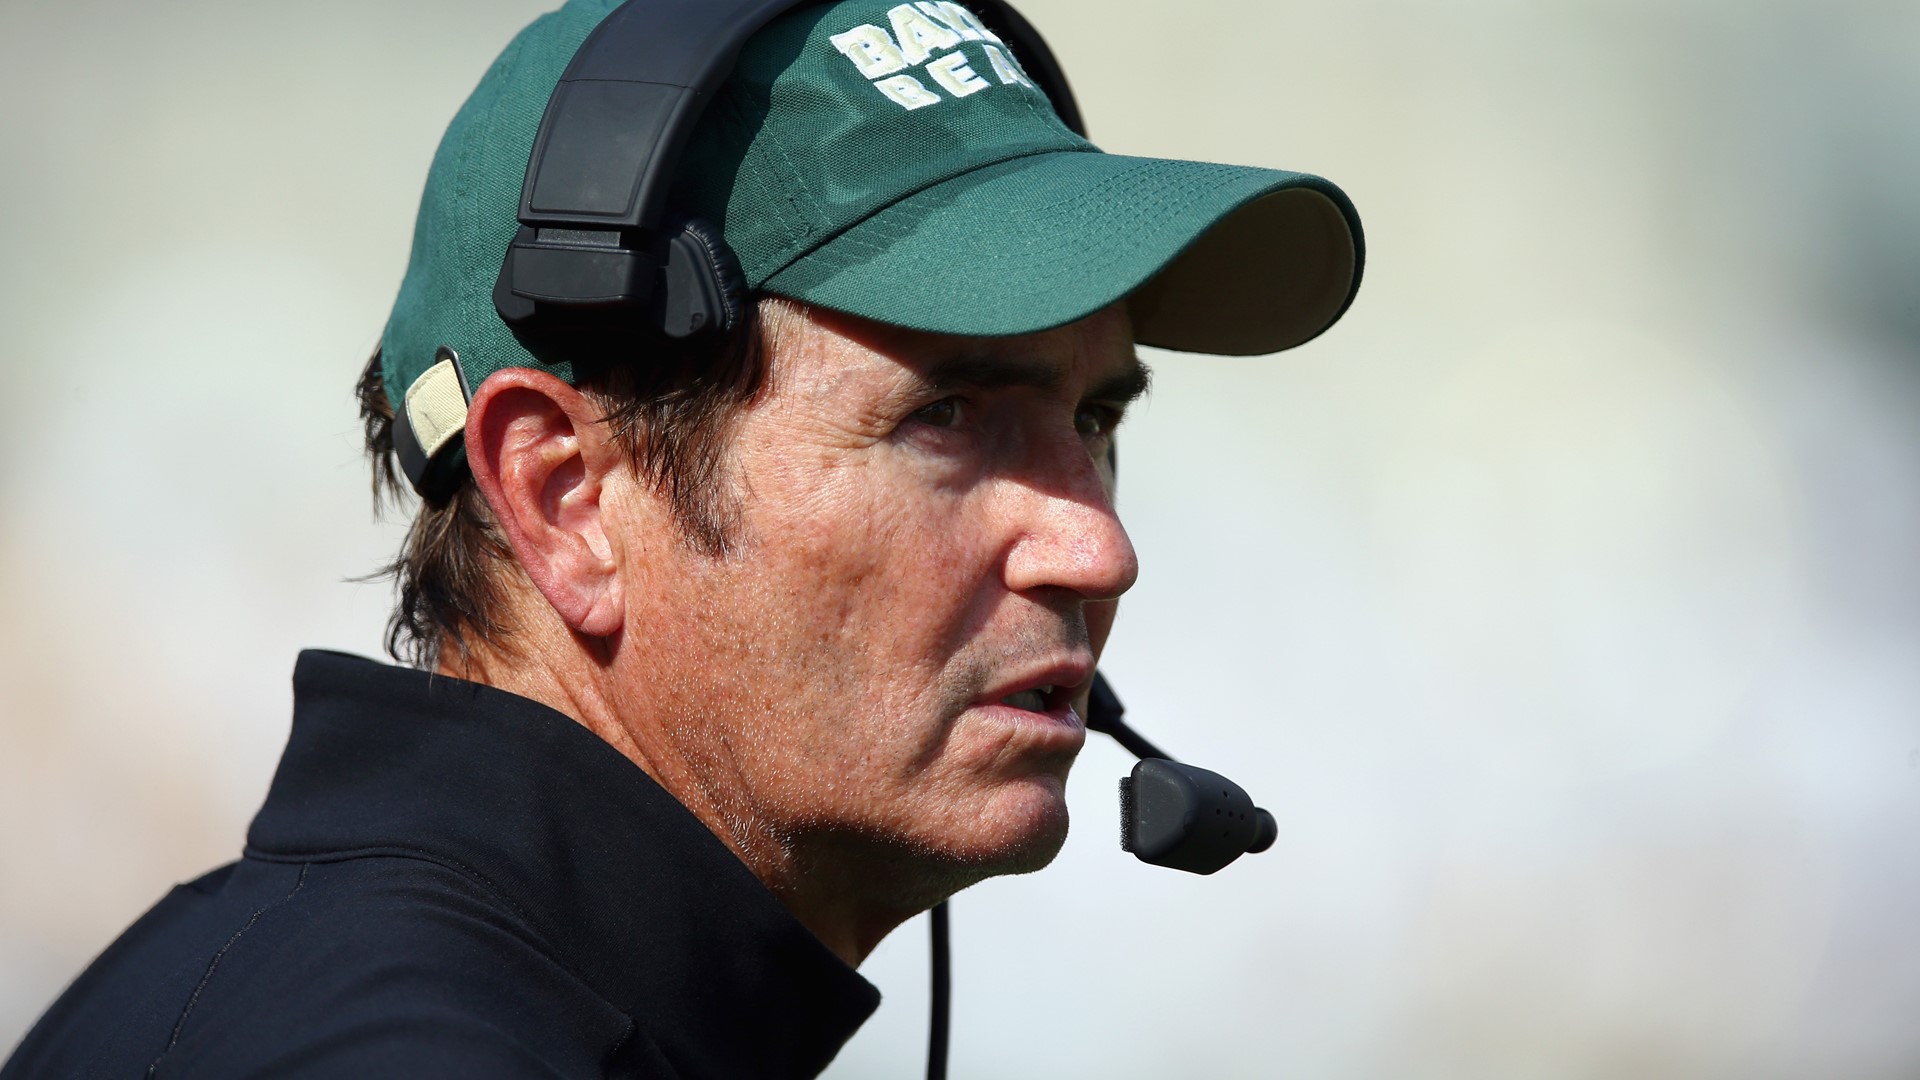 Former Baylor head football coach Art Briles will return to Texas sidelines as Mount Vernon High School's head football coach this fall, according to Mount Vernon ISD.